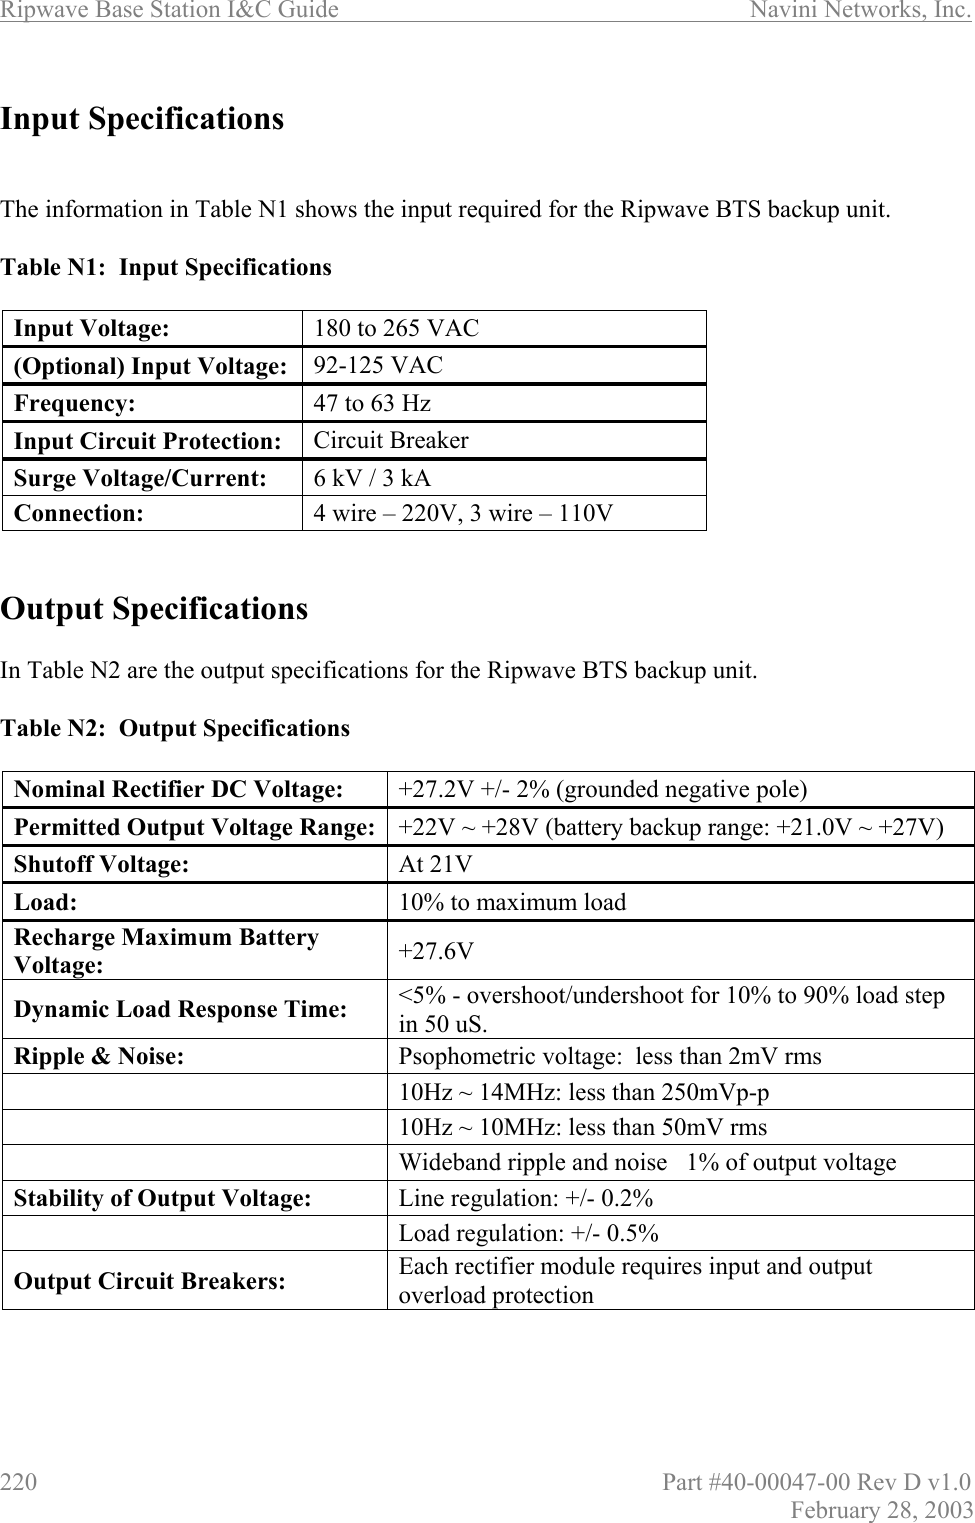 Ripwave Base Station I&amp;C Guide                      Navini Networks, Inc. 220                          Part #40-00047-00 Rev D v1.0 February 28, 2003  Input Specifications   The information in Table N1 shows the input required for the Ripwave BTS backup unit.  Table N1:  Input Specifications  Input Voltage:  180 to 265 VAC (Optional) Input Voltage:  92-125 VAC Frequency:  47 to 63 Hz Input Circuit Protection:  Circuit Breaker Surge Voltage/Current:  6 kV / 3 kA Connection:  4 wire – 220V, 3 wire – 110V   Output Specifications  In Table N2 are the output specifications for the Ripwave BTS backup unit.  Table N2:  Output Specifications  Nominal Rectifier DC Voltage:  +27.2V +/- 2% (grounded negative pole) Permitted Output Voltage Range: +22V ~ +28V (battery backup range: +21.0V ~ +27V) Shutoff Voltage:  At 21V Load:  10% to maximum load Recharge Maximum Battery Voltage:  +27.6V Dynamic Load Response Time:  &lt;5% - overshoot/undershoot for 10% to 90% load step in 50 uS. Ripple &amp; Noise:  Psophometric voltage:  less than 2mV rms  10Hz ~ 14MHz: less than 250mVp-p  10Hz ~ 10MHz: less than 50mV rms  Wideband ripple and noise   1% of output voltage Stability of Output Voltage:  Line regulation: +/- 0.2%  Load regulation: +/- 0.5% Output Circuit Breakers:  Each rectifier module requires input and output overload protection  